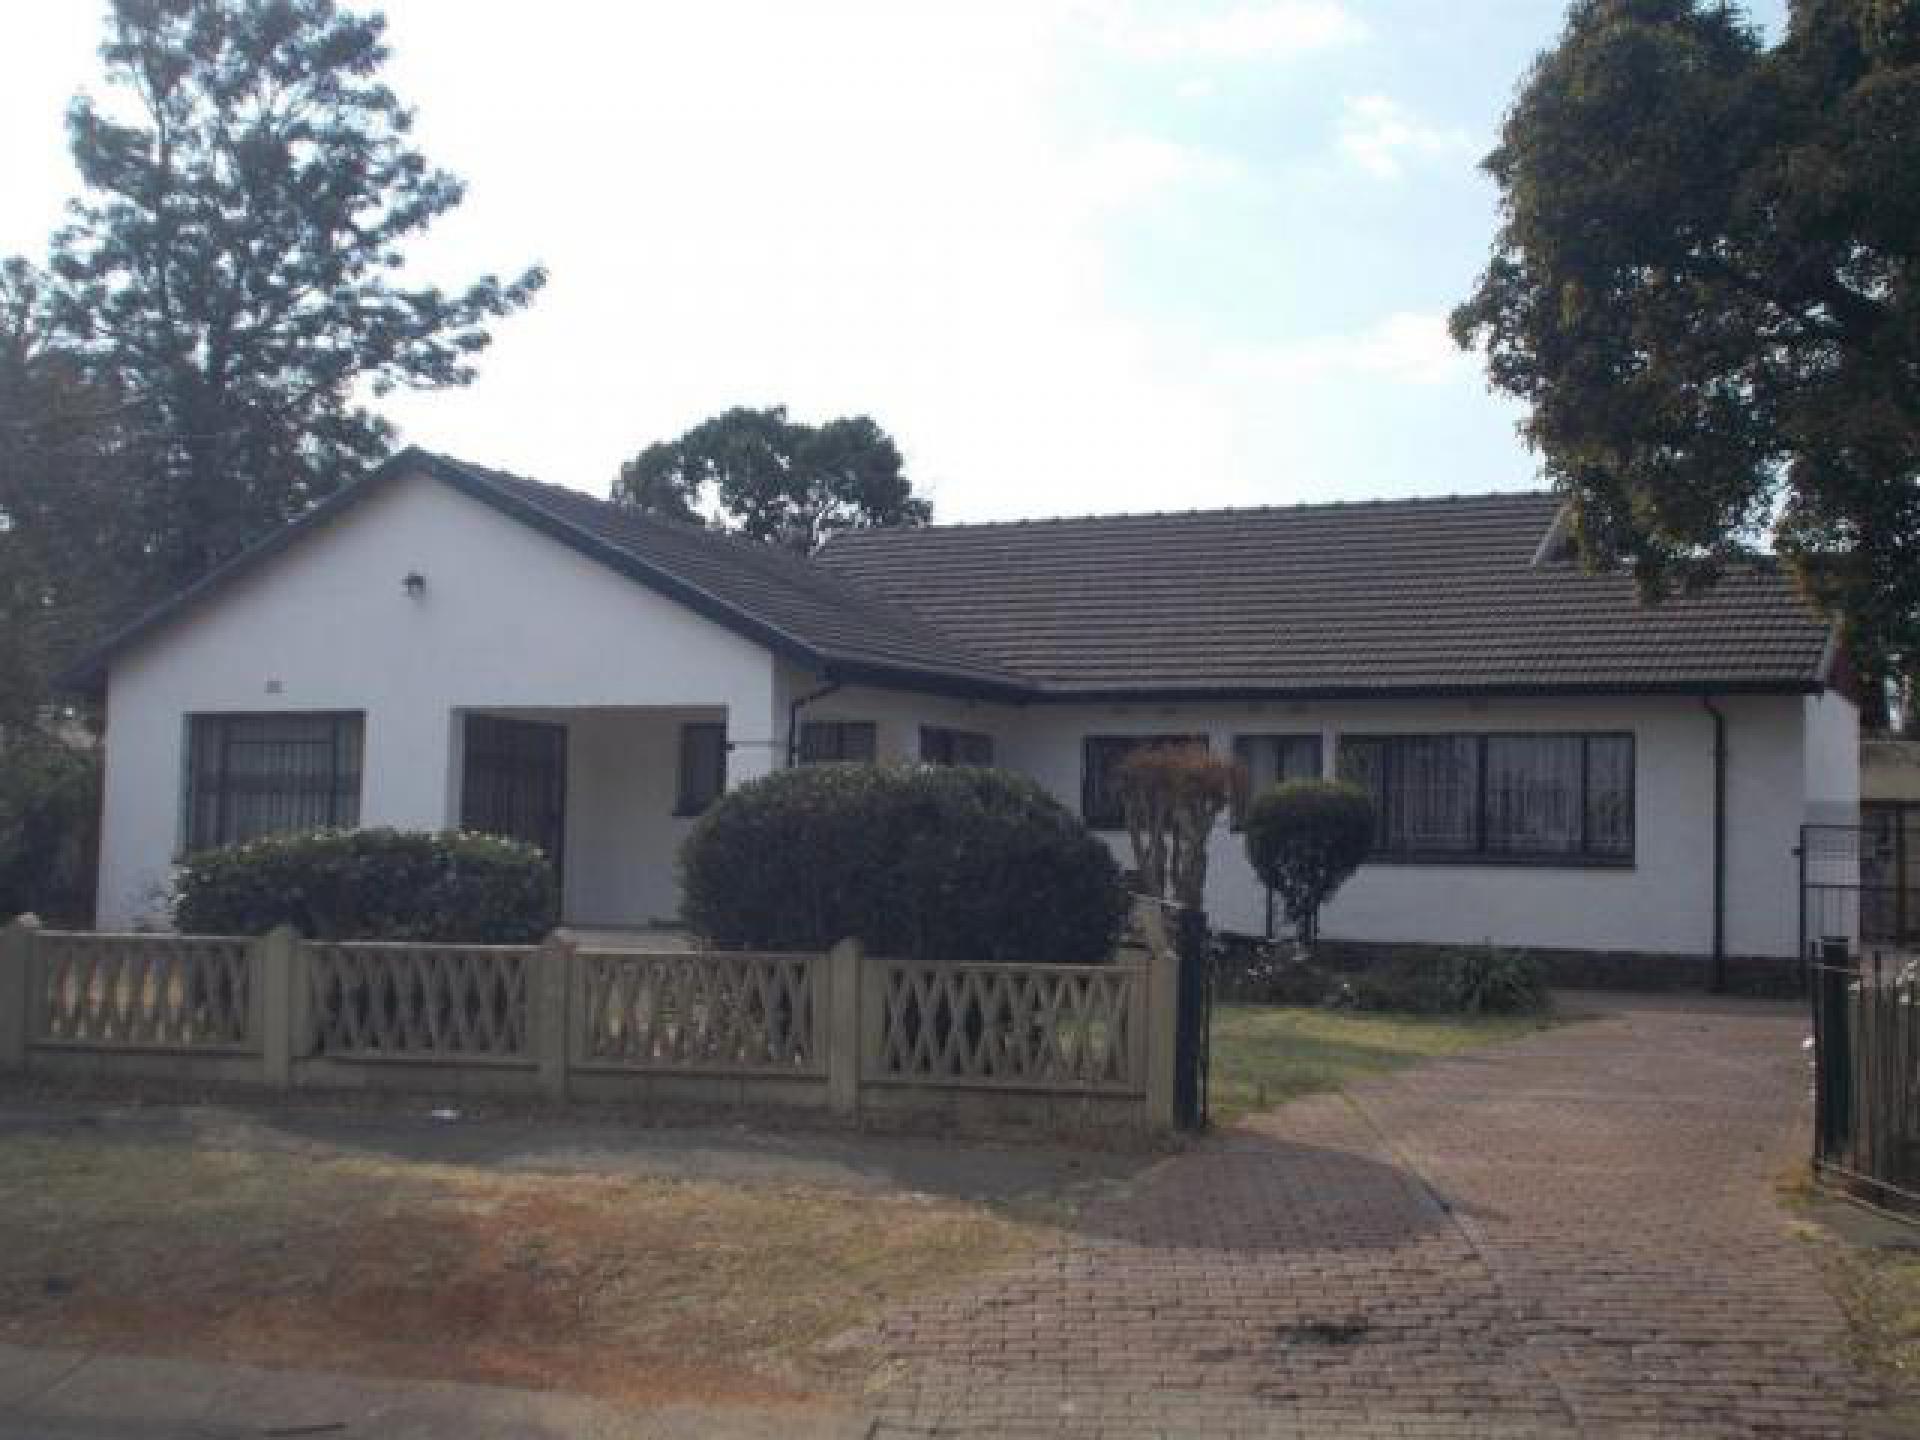 Front View of property in Kibler Park